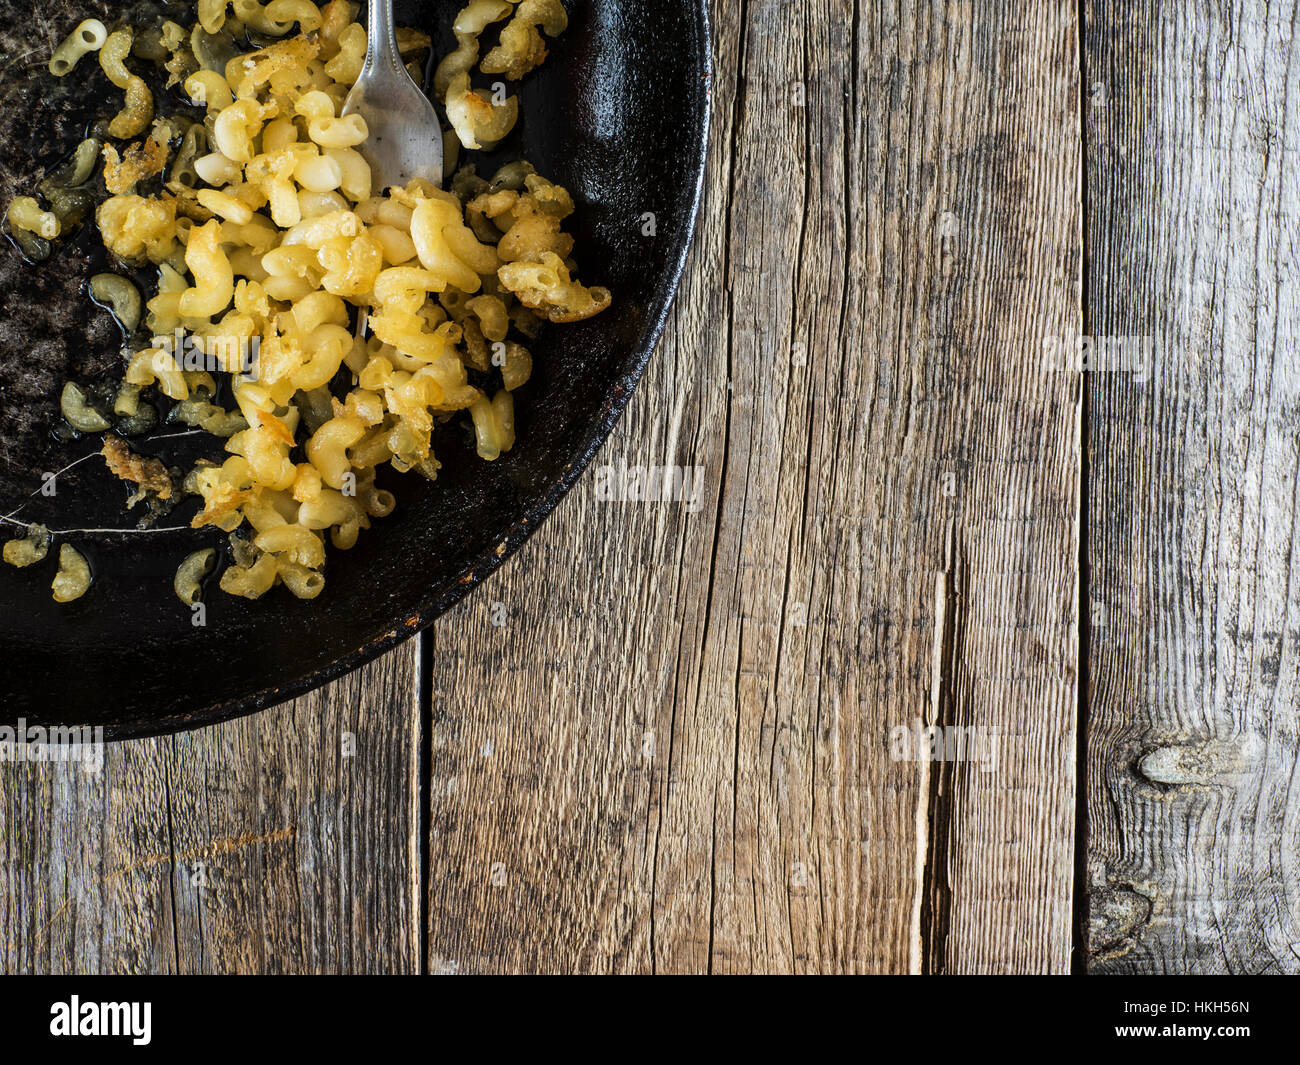 Rotten food Stock Photos, Royalty Free Rotten food Images